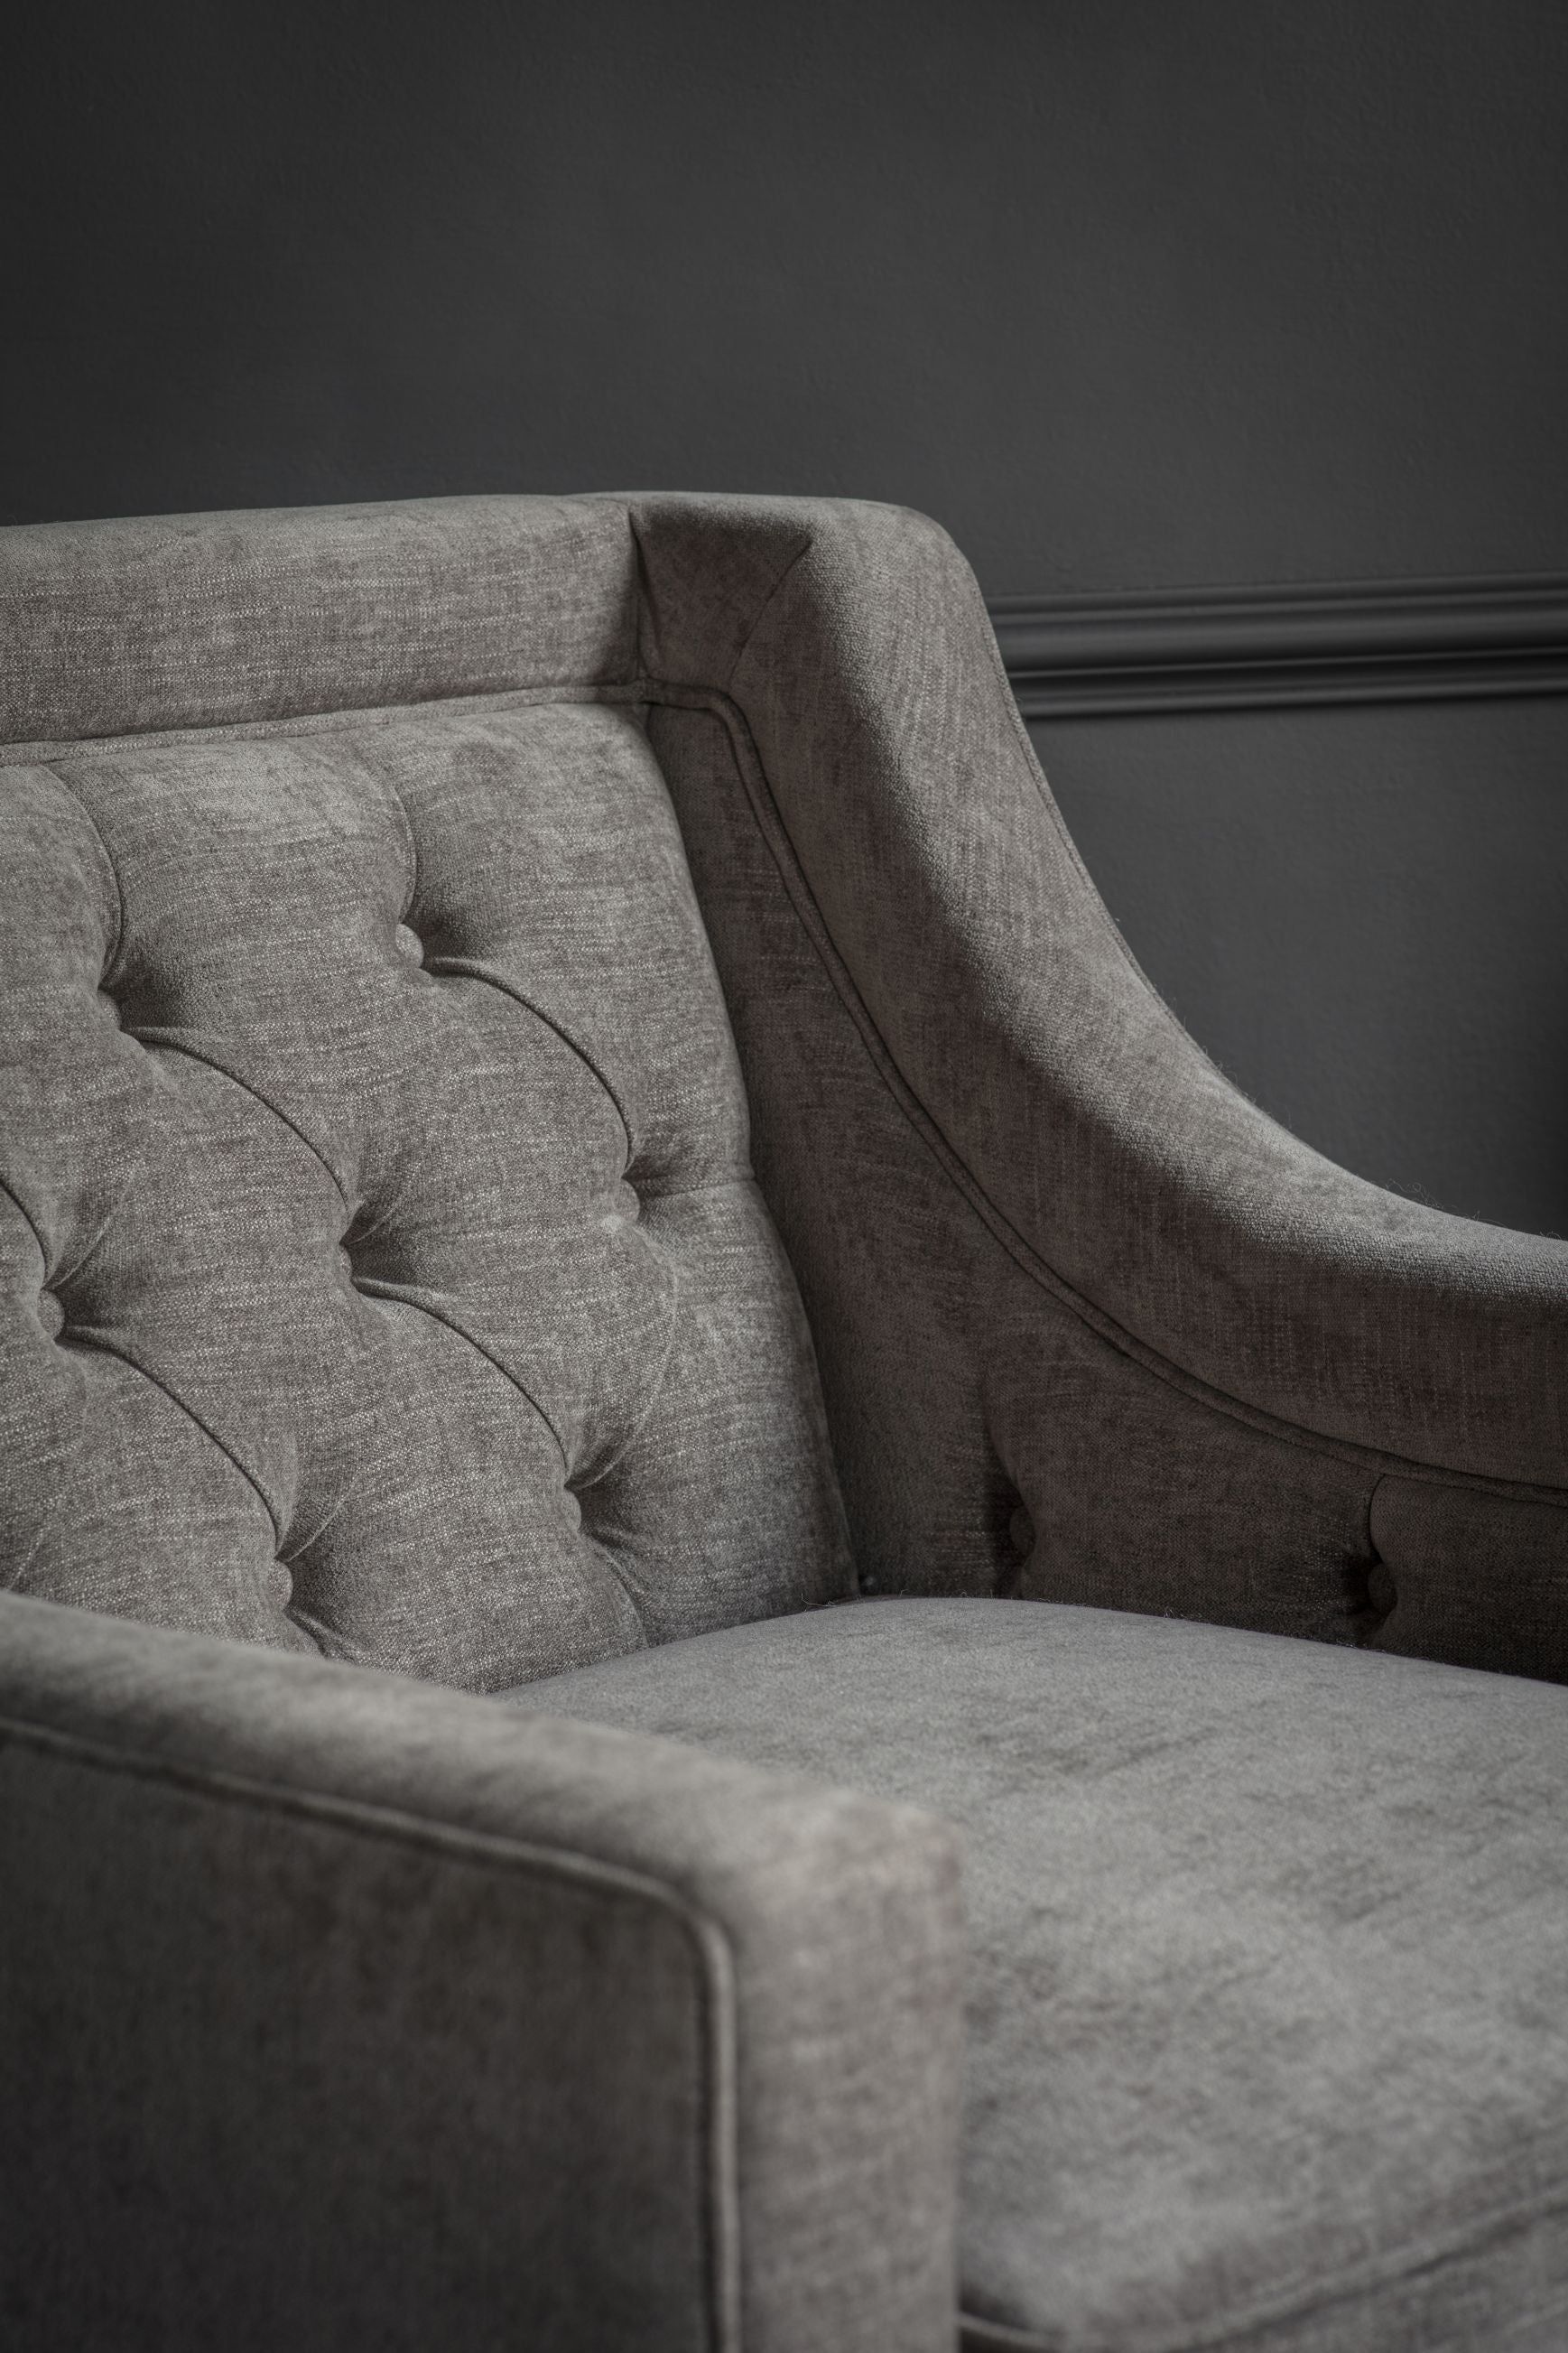 Theodore Buttoned Armchair - Warm Grey Fabric